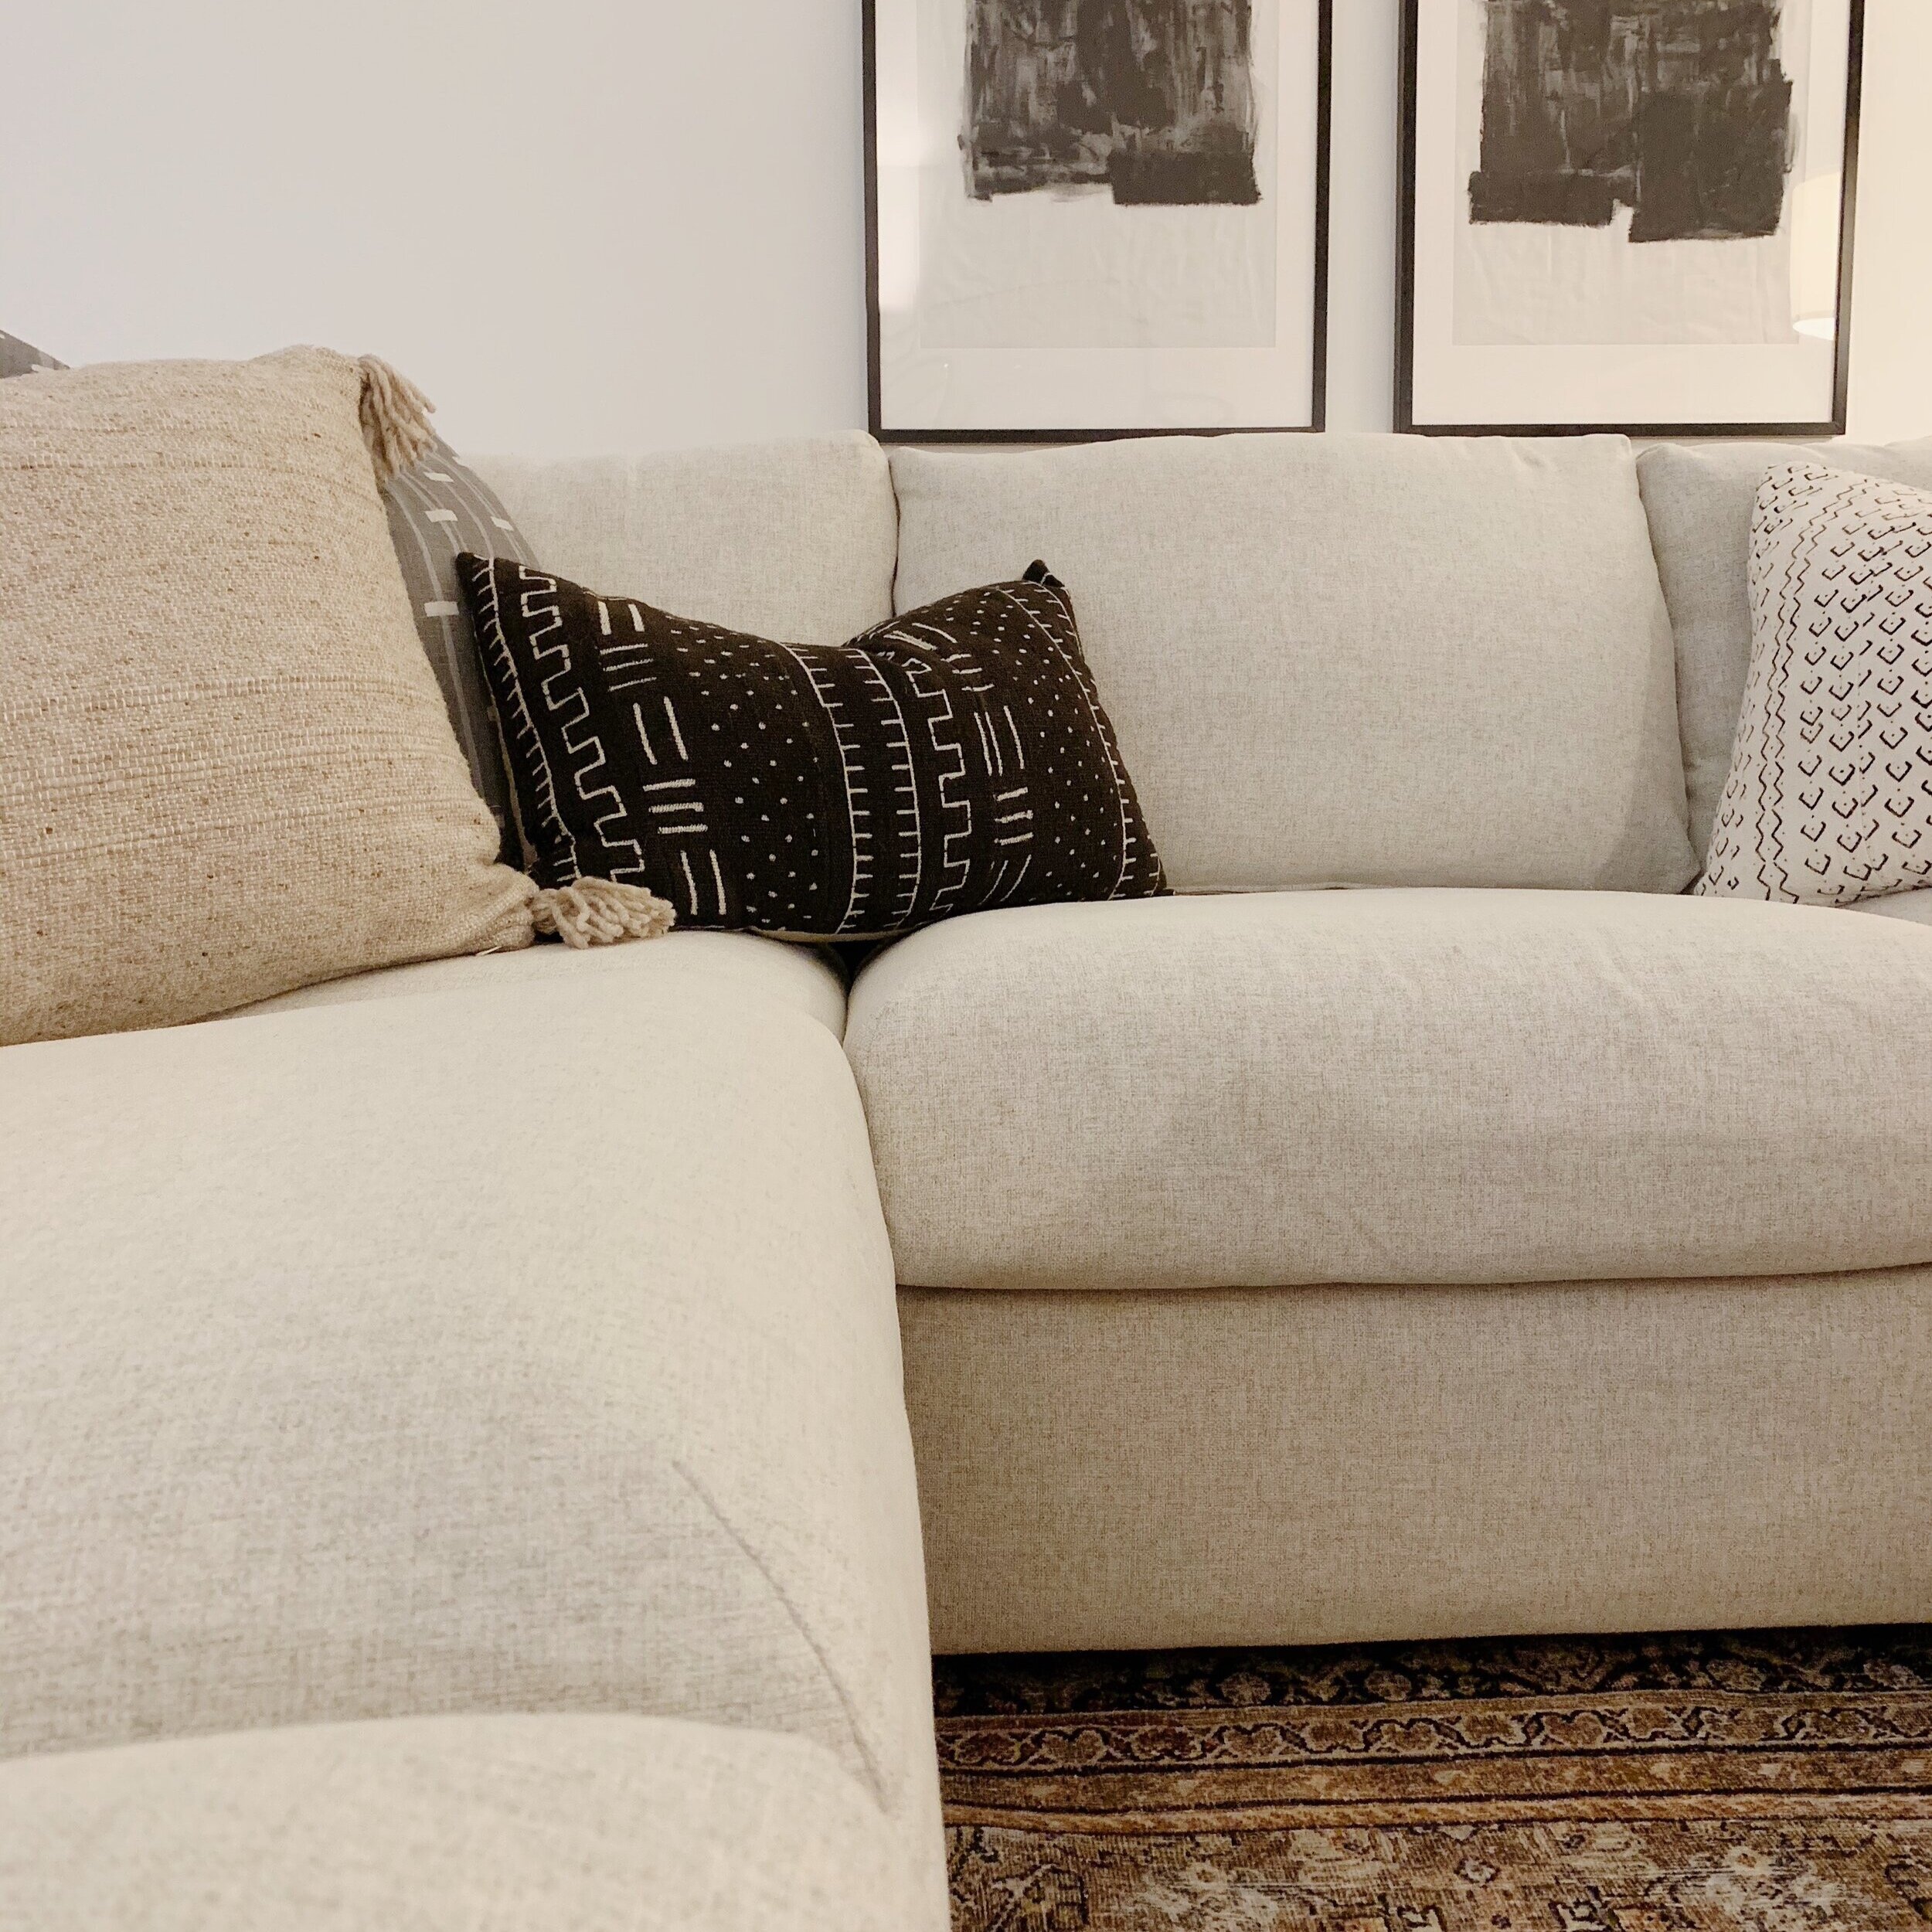 IKEA VIMLE Sectional Sofa Review — My Simply Simple